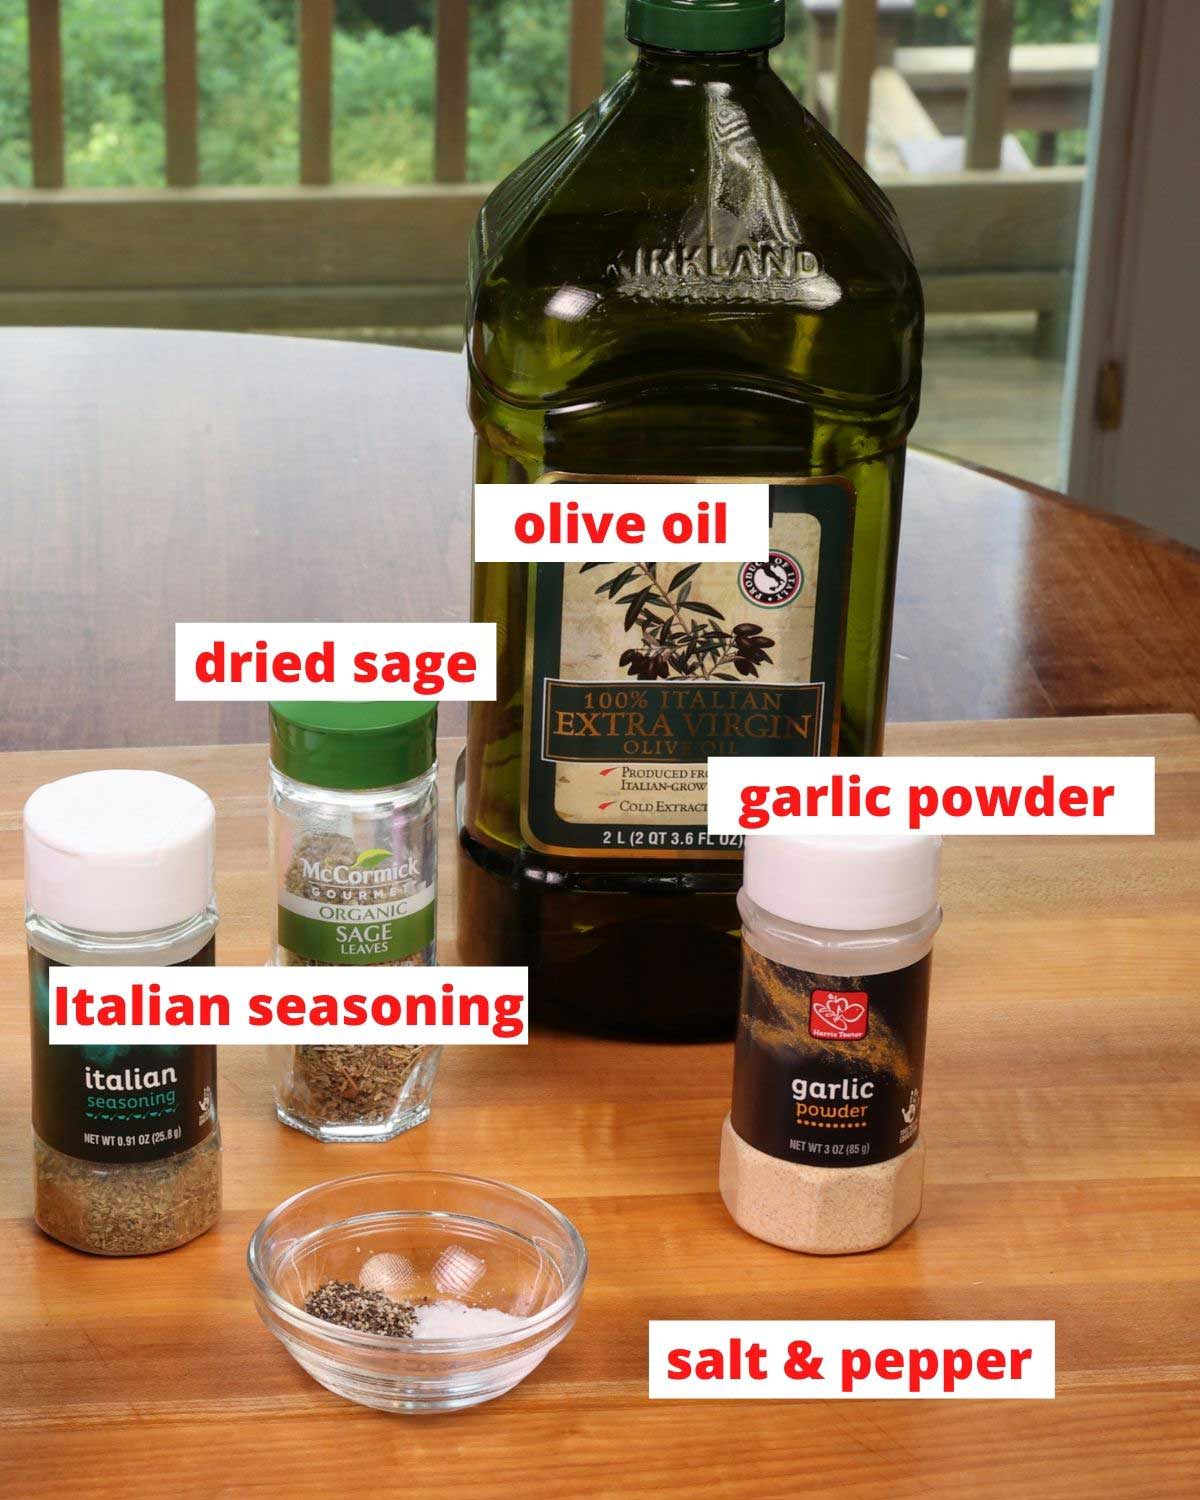 seasonings and olive oil on a wooden cutting board in a kitchen.